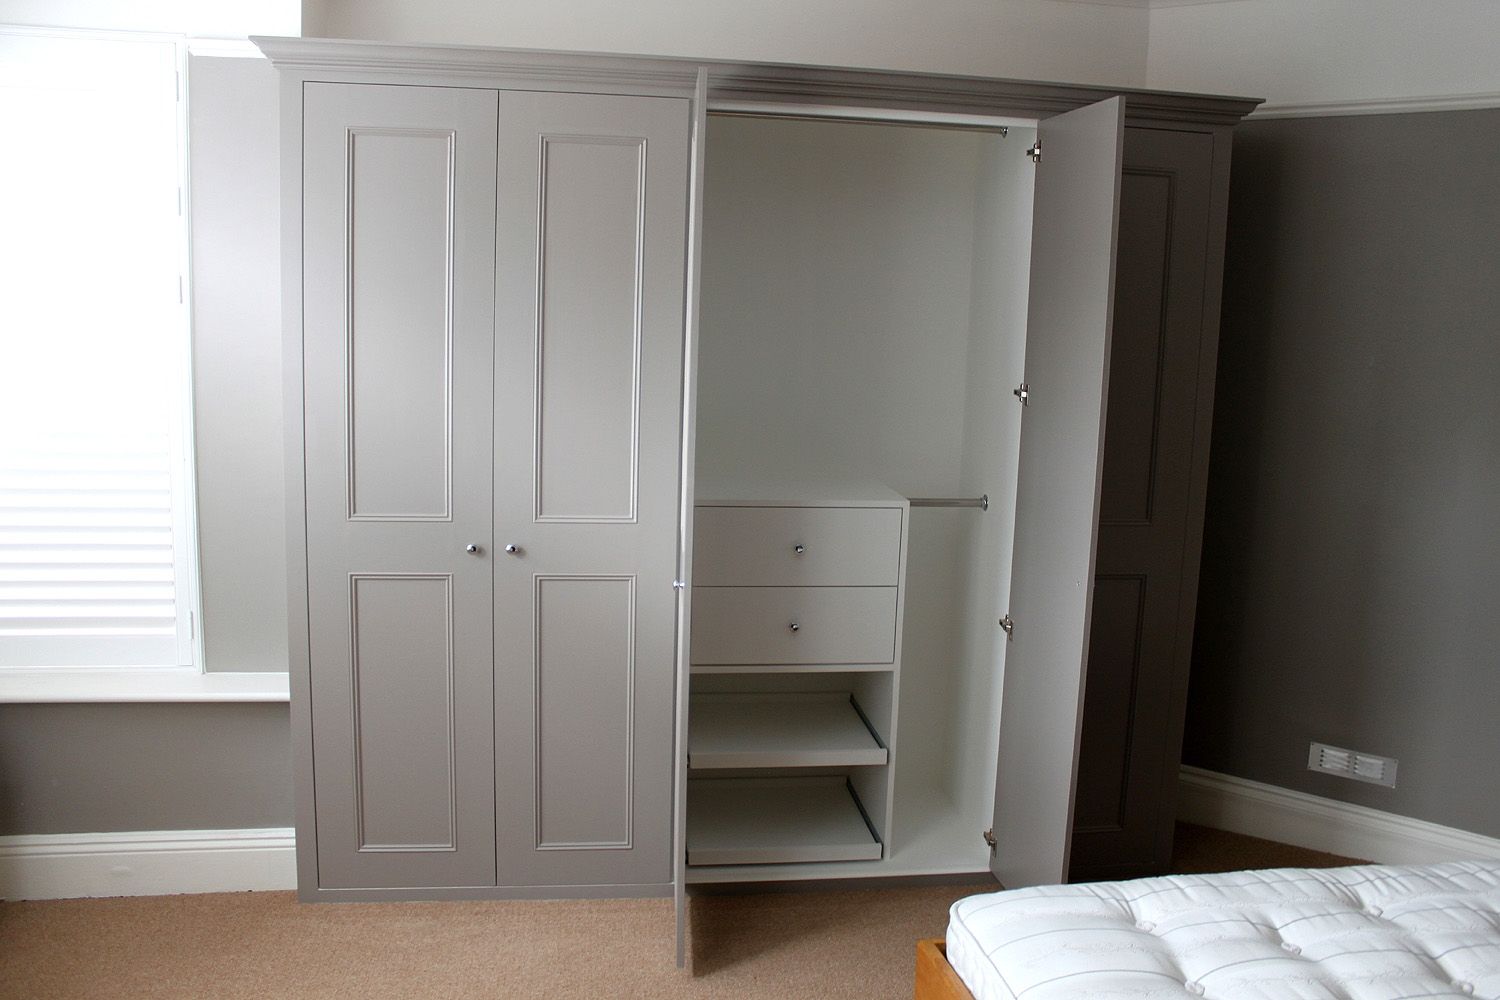 Fitted Sliding Wardrobes Excellent Mirrored Fitted Wardrobes Regarding Solid Wood Fitted Wardrobes (View 10 of 15)